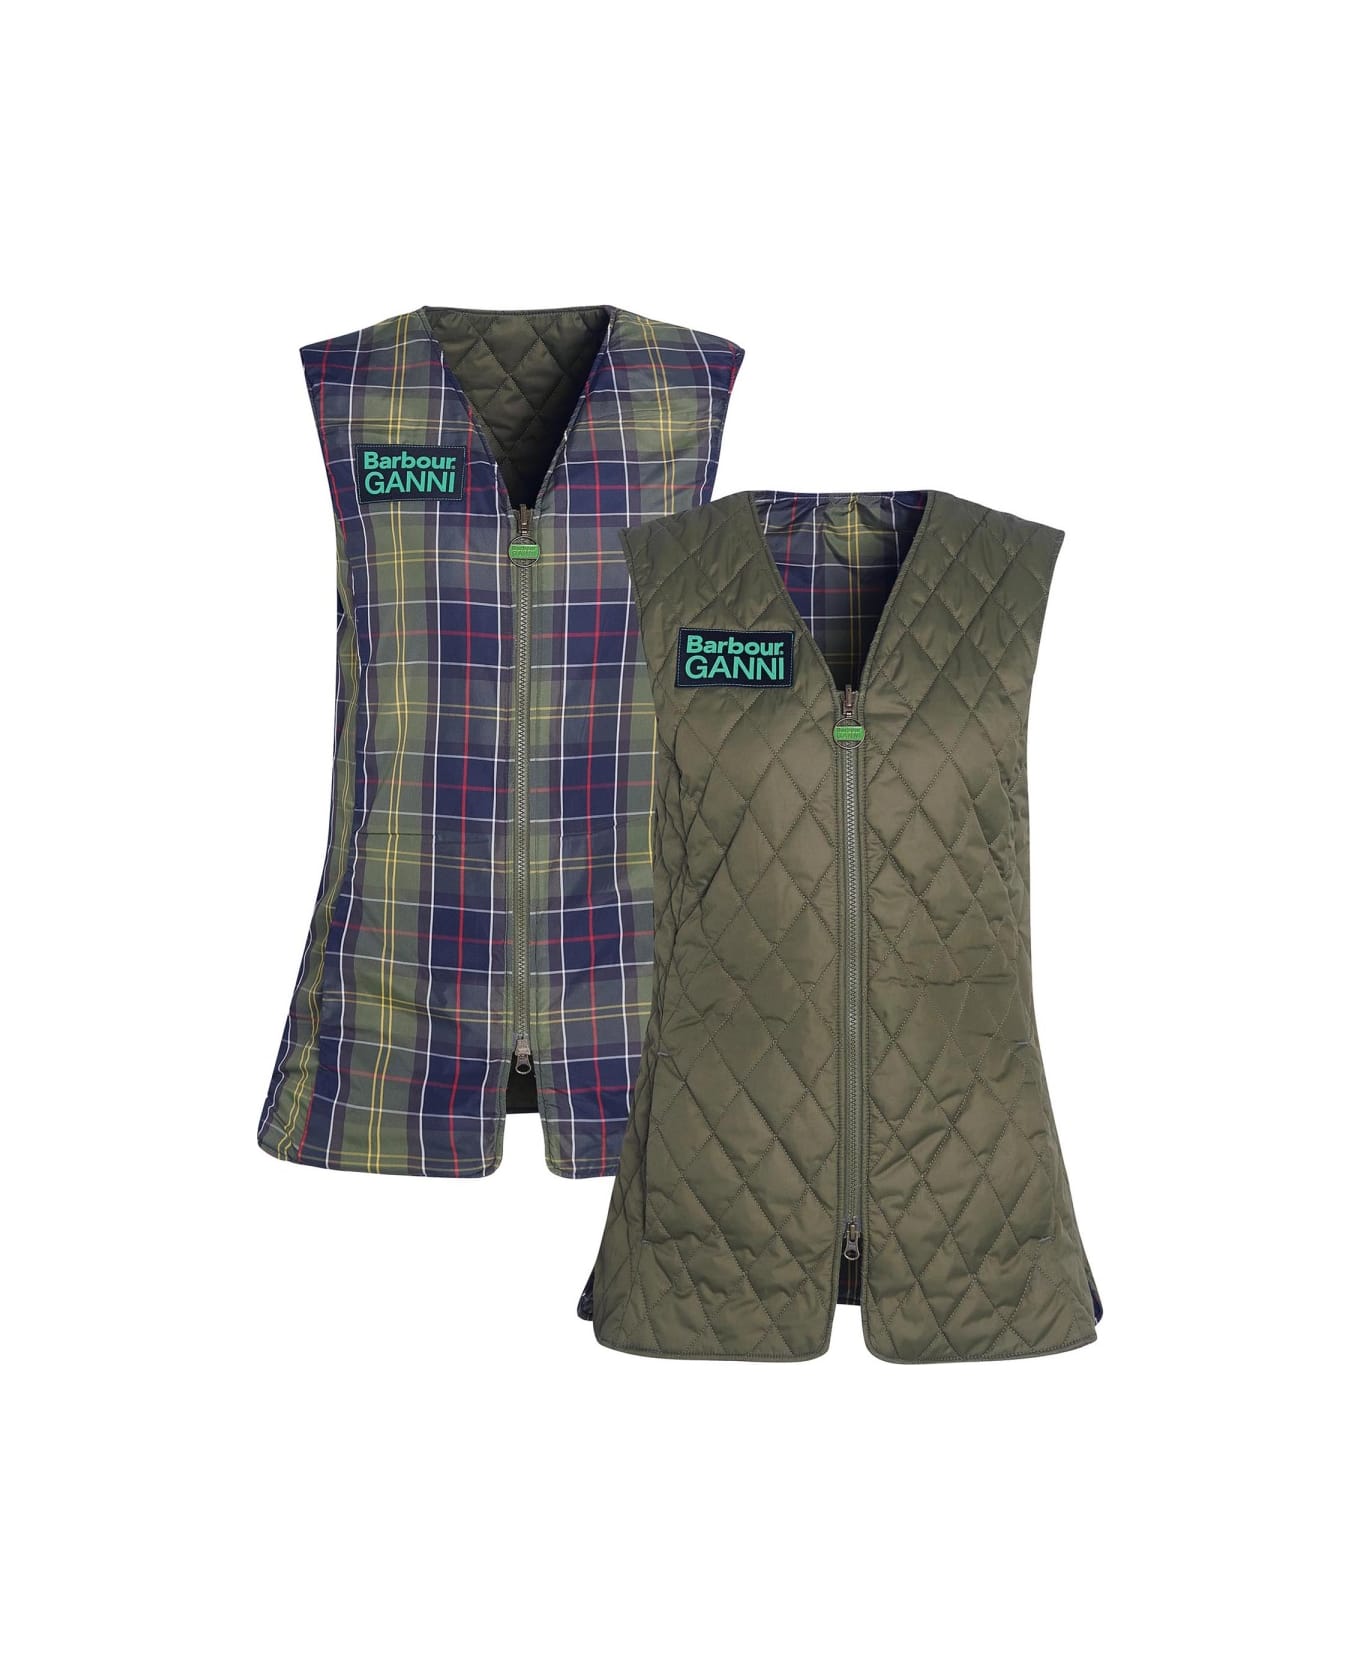 Barbour "betty" Reversible Vest - MILITARY GREEN